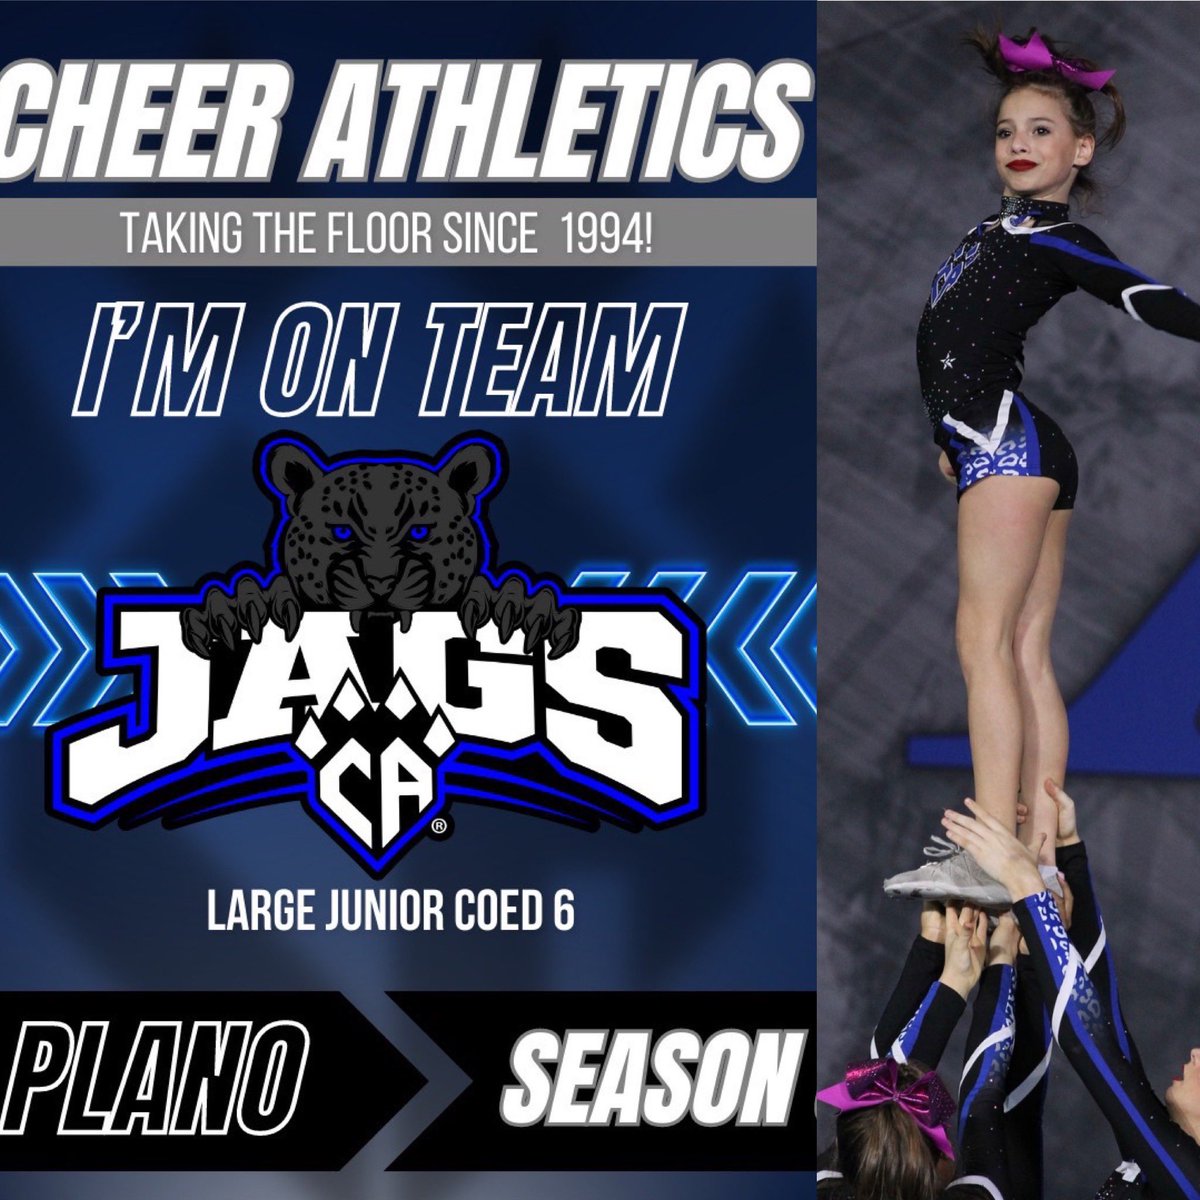 Season #9, here they come! They feel truly blessed to have been chosen for these amazing teams for another year! #cheerathleticsplano #bestofthebest